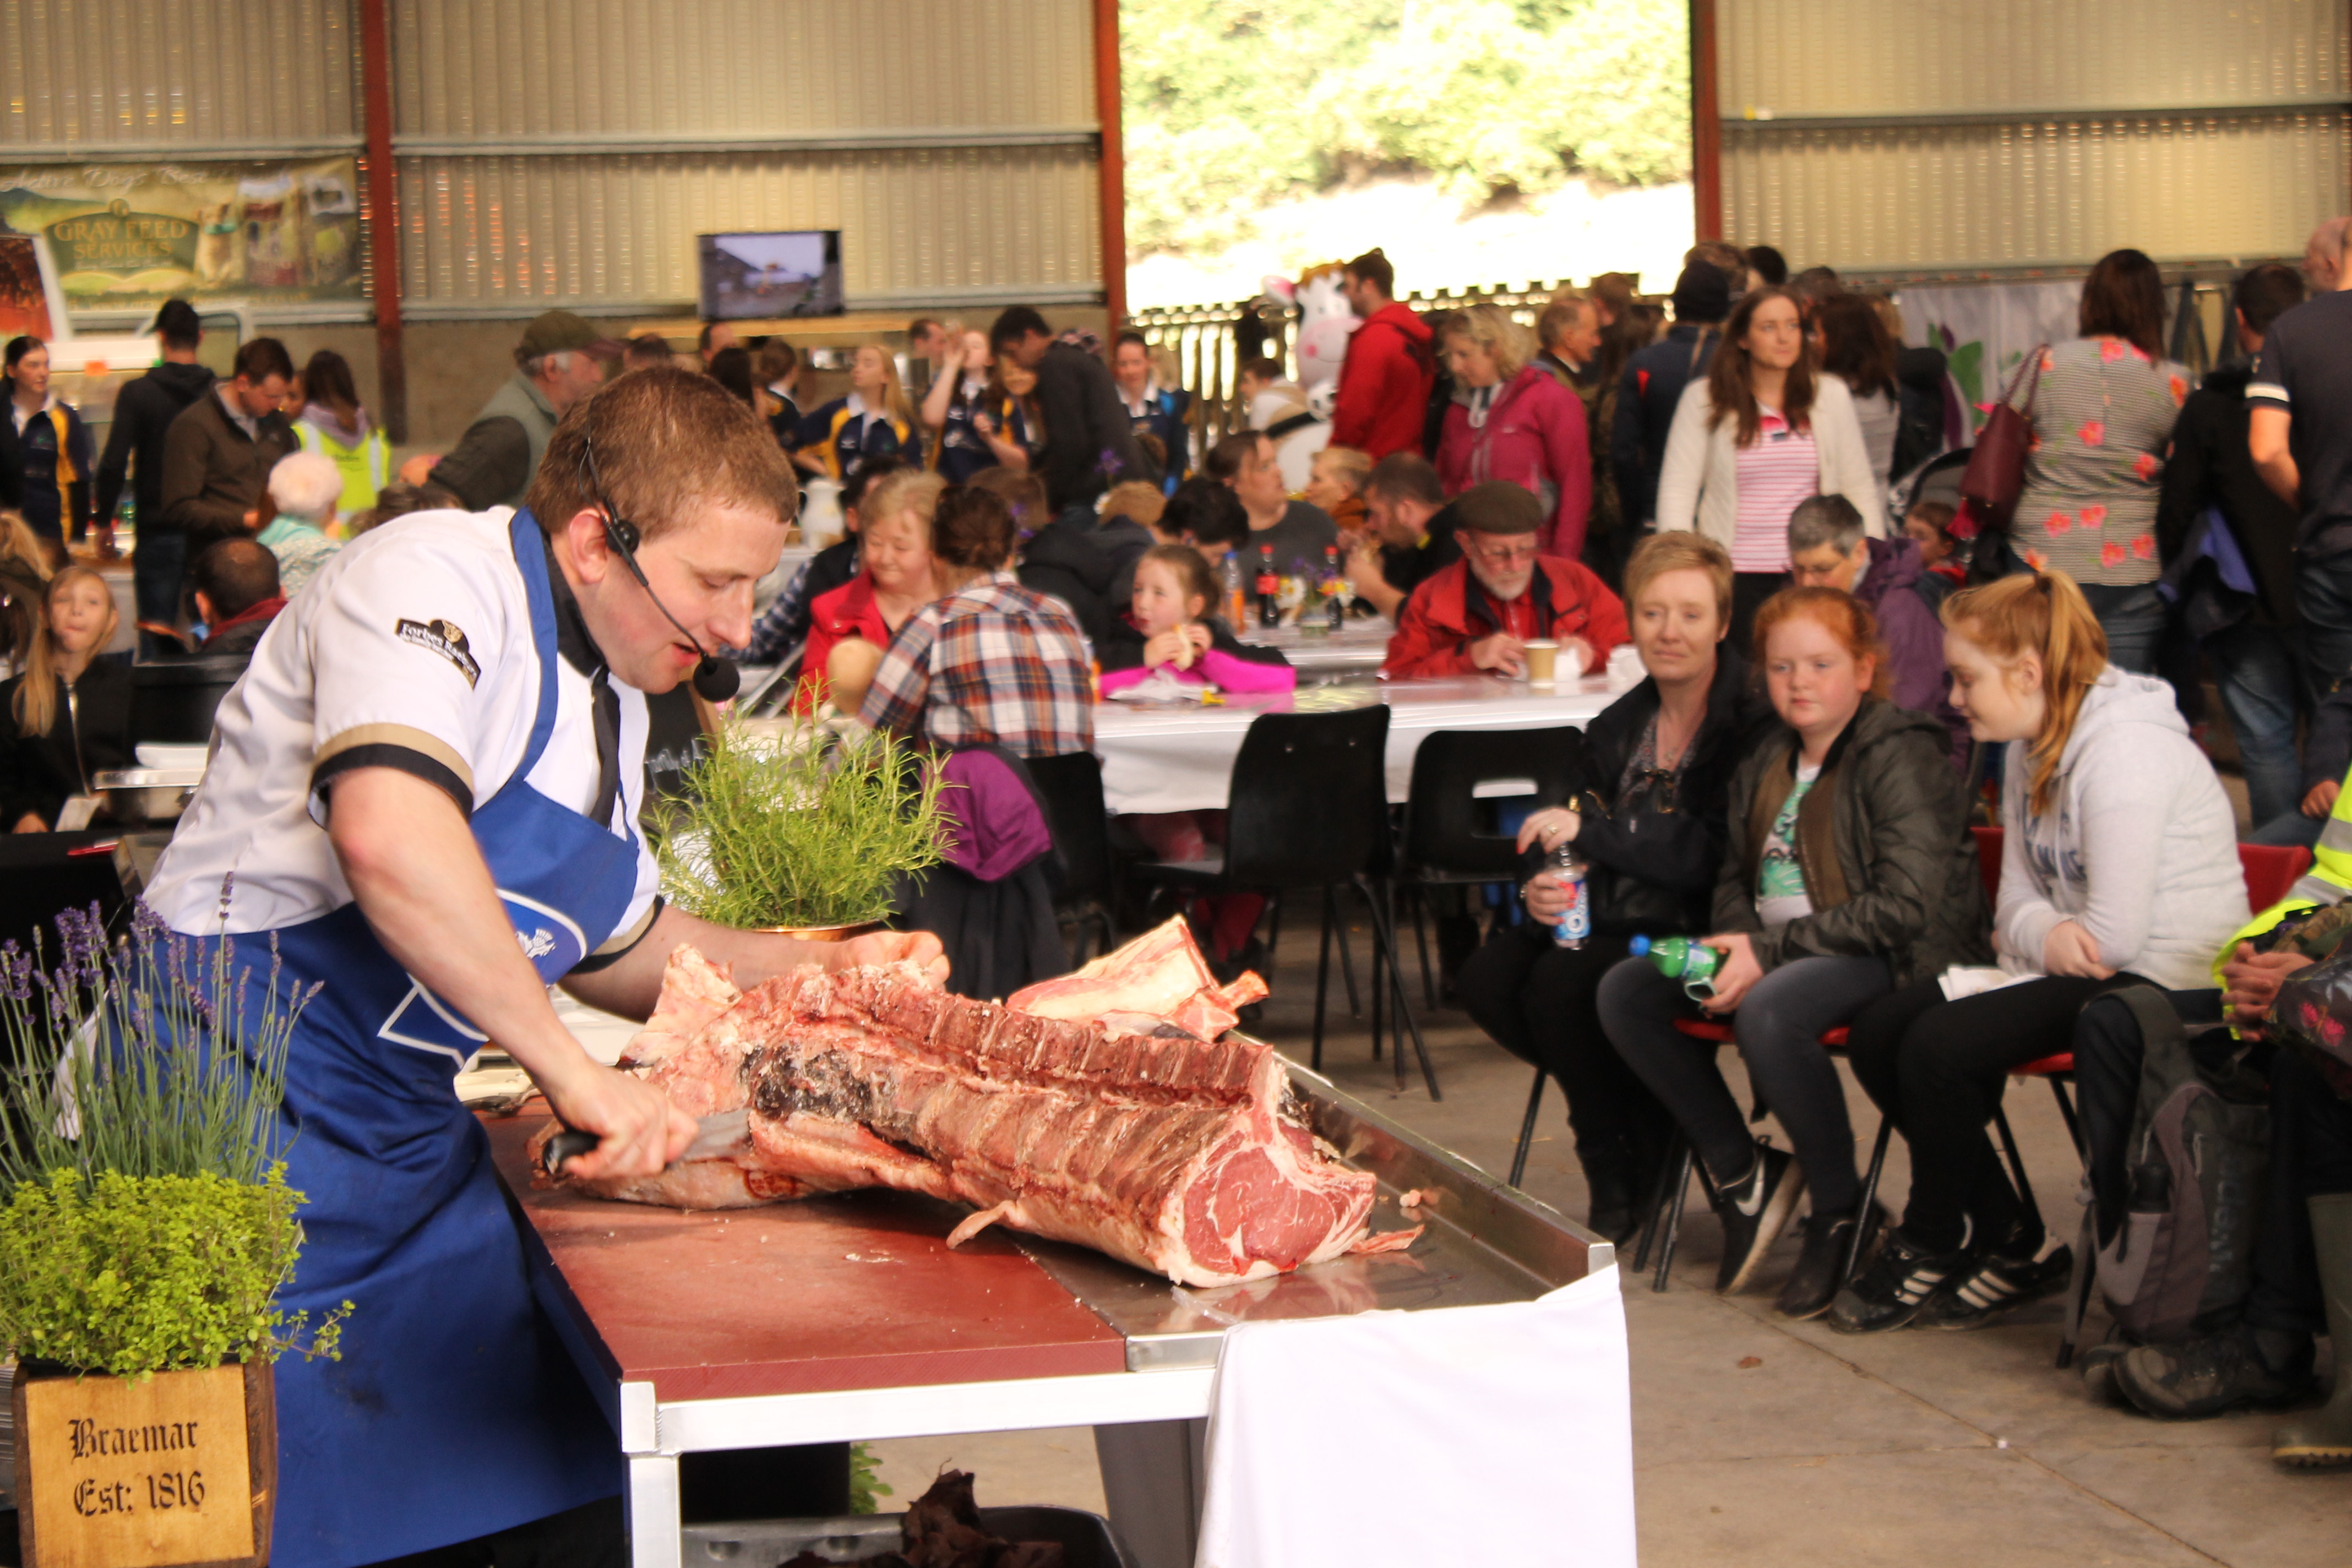 Open Farm Sunday visitors can look forward to sheep shearing and butchery demonstrations, and a walk through crops.